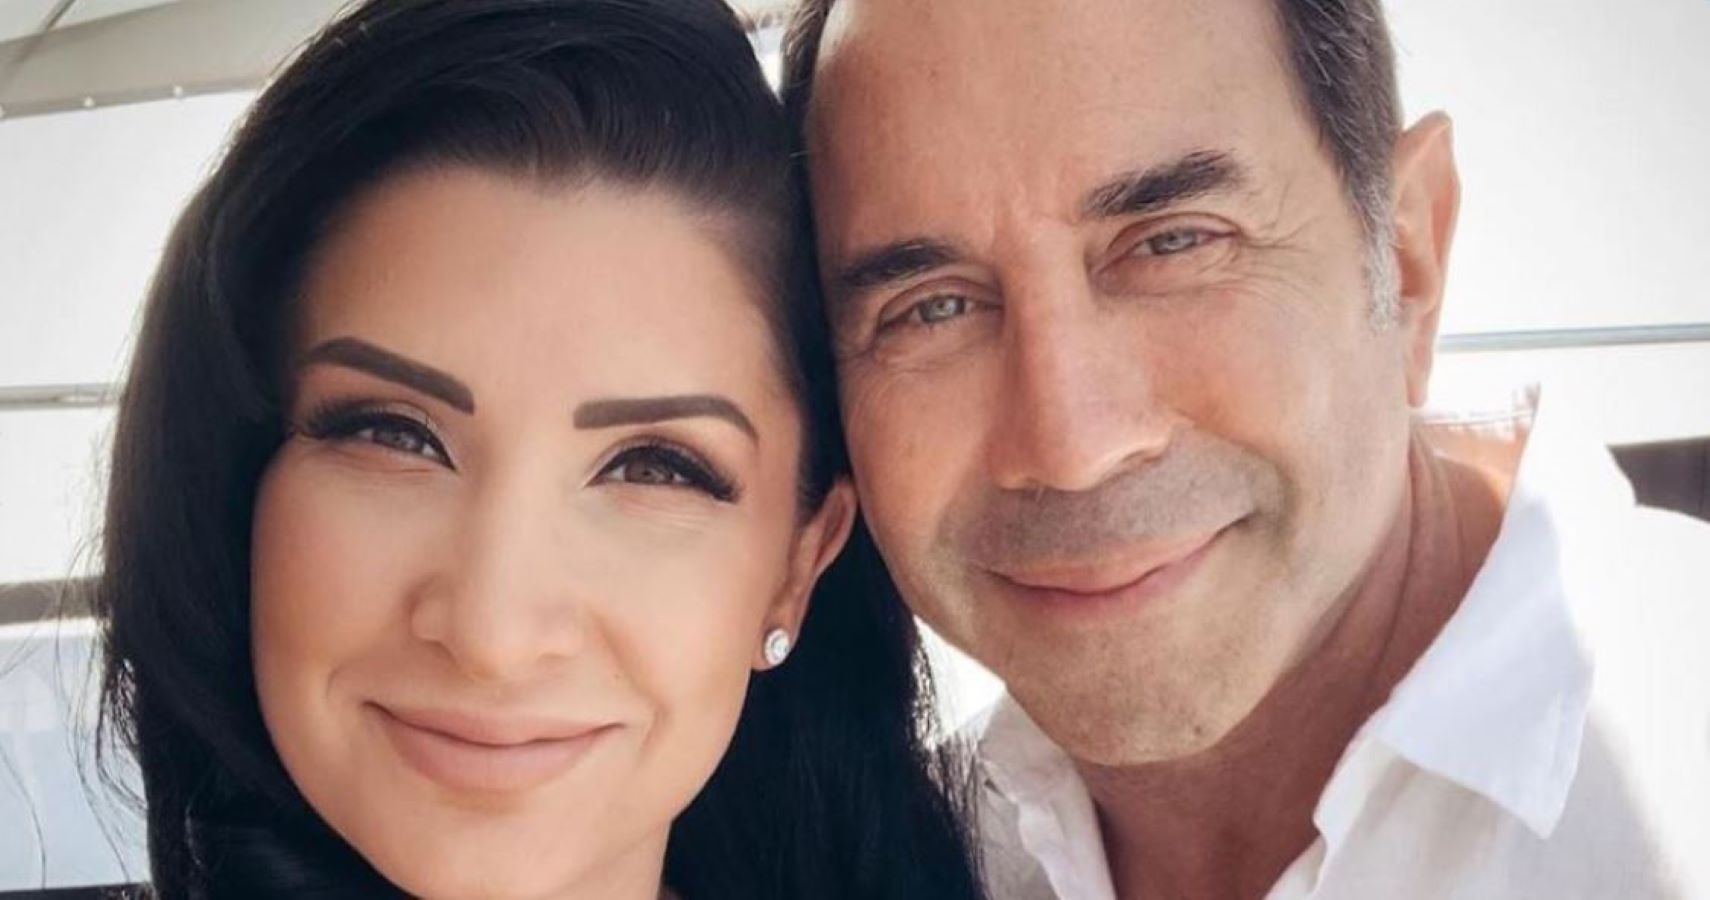 Botched' star Dr. Paul Nassif, wife Brittany welcome baby girl, Trending